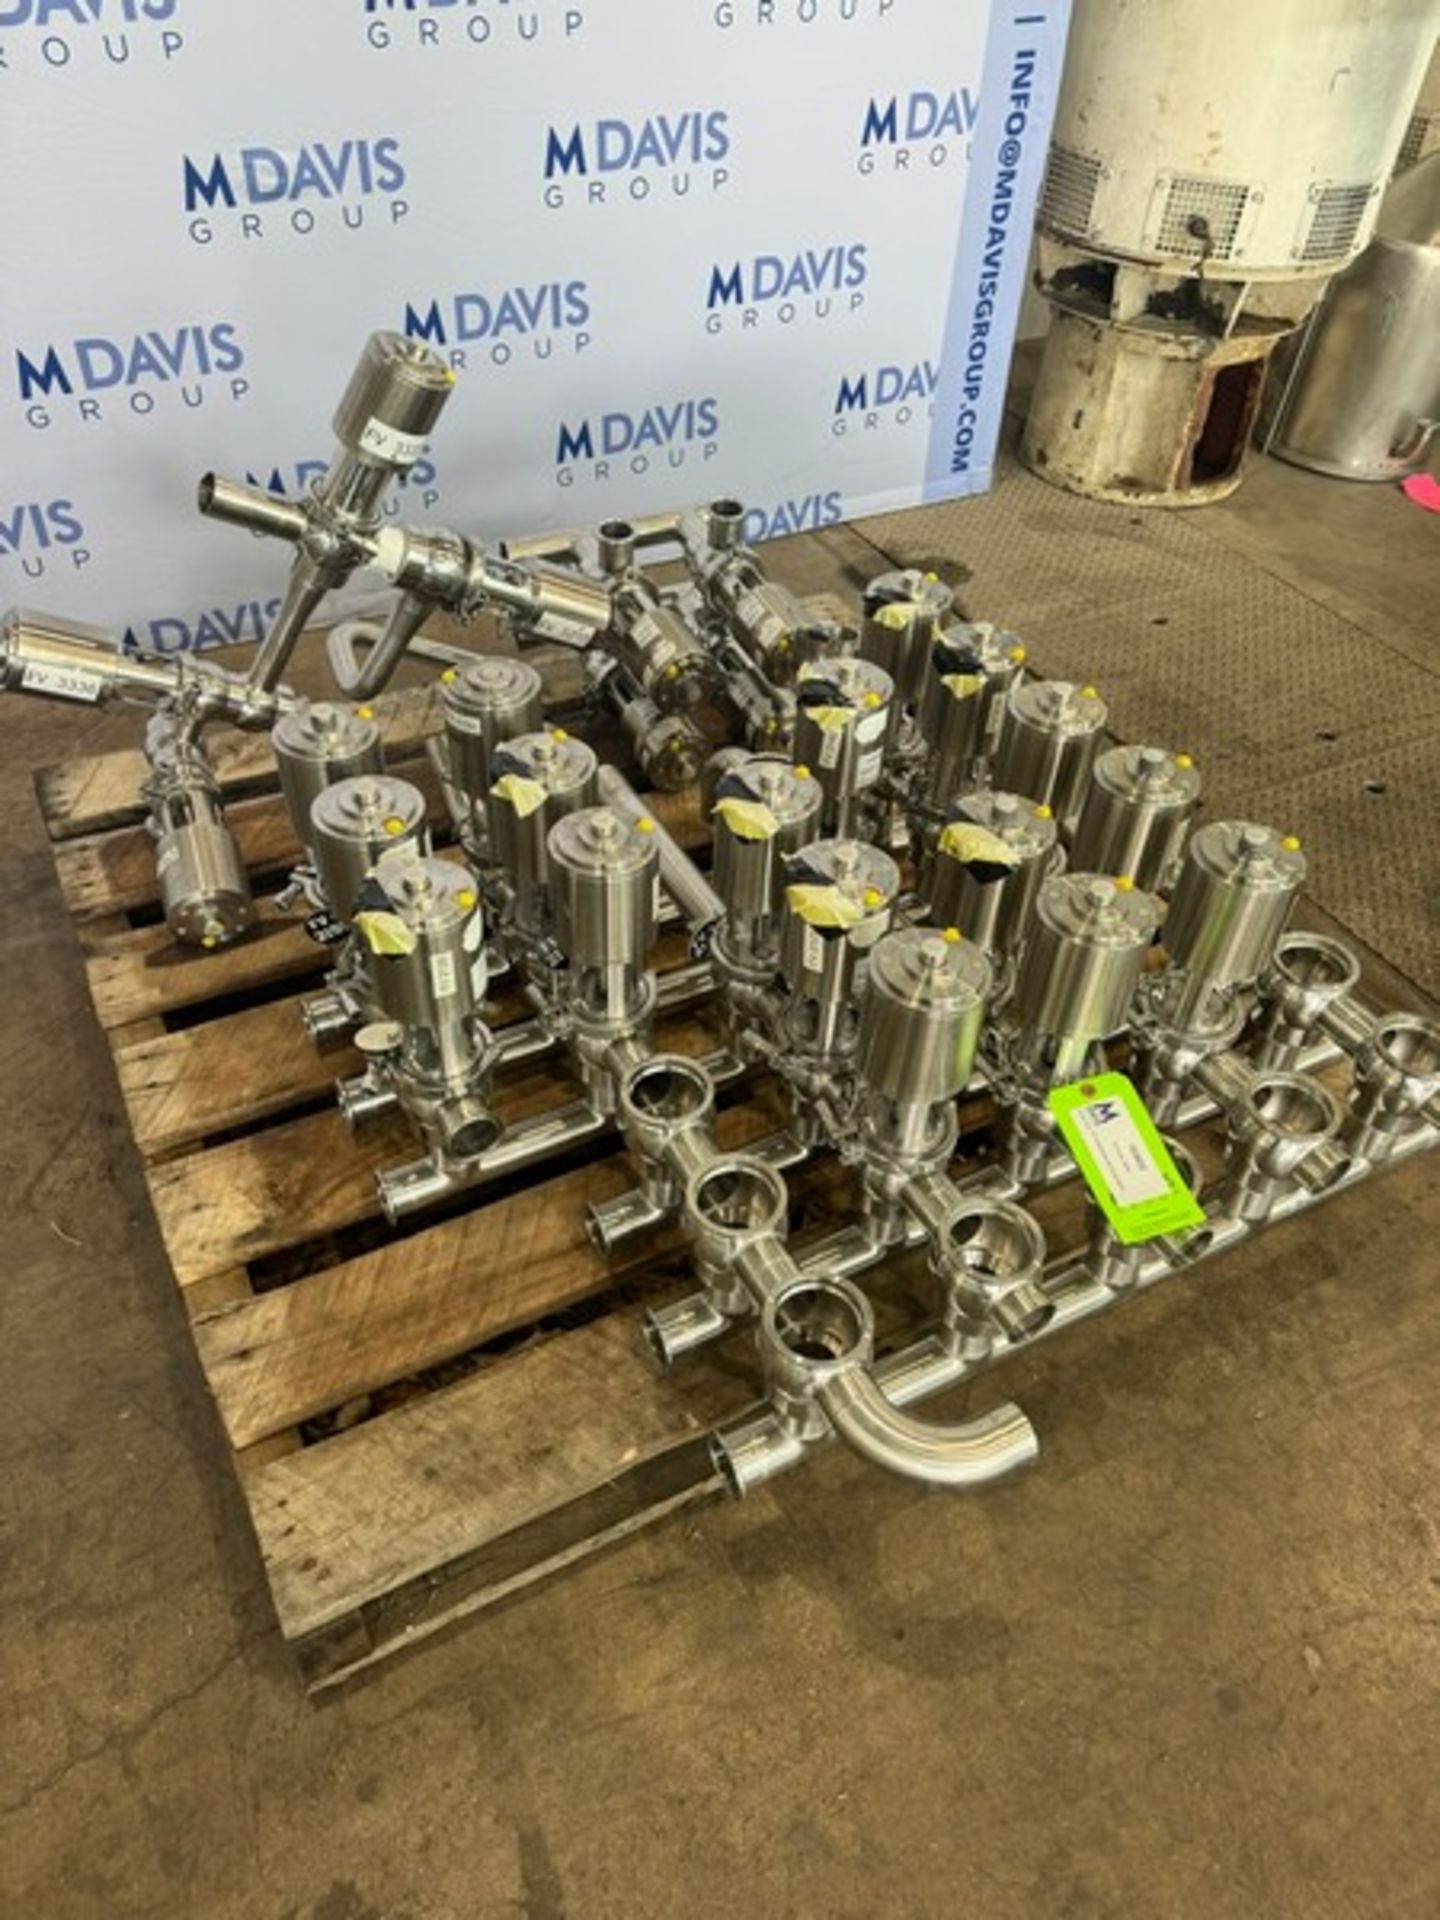 (21) Sudmo S/S Air Valves, with S/S Manifold (Inv. #103822) (LOCATED MONROEVILLE, PA) (RIGGING, - Image 5 of 5